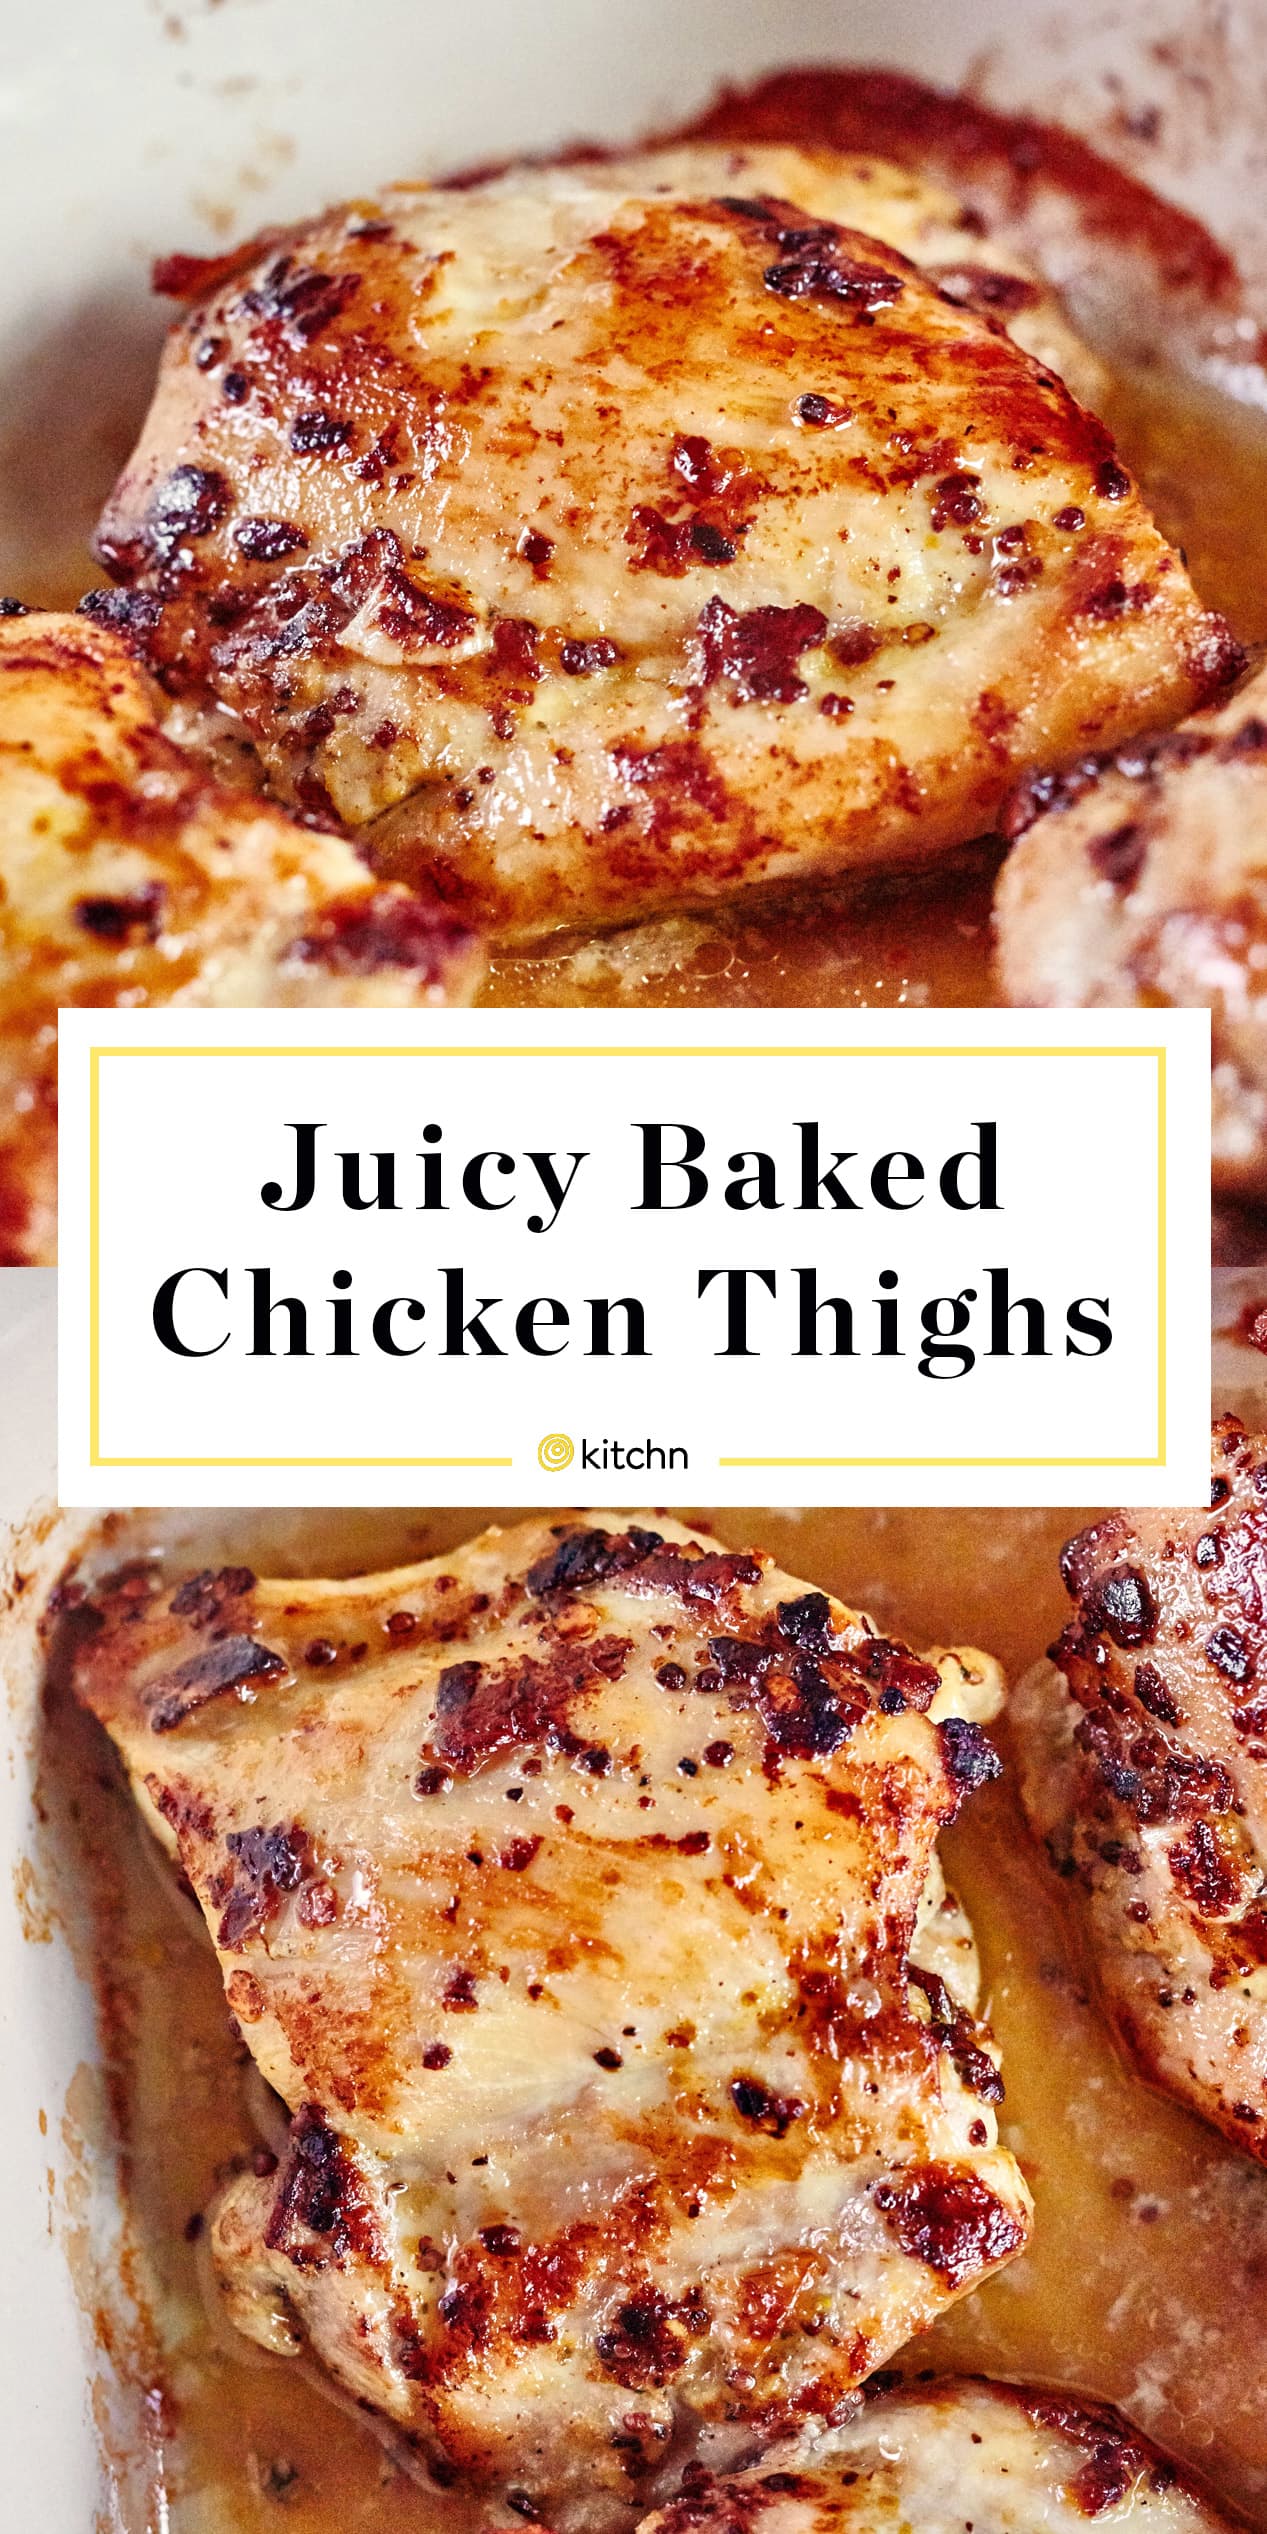 Sale > oven baked chicken thigh recipes > in stock